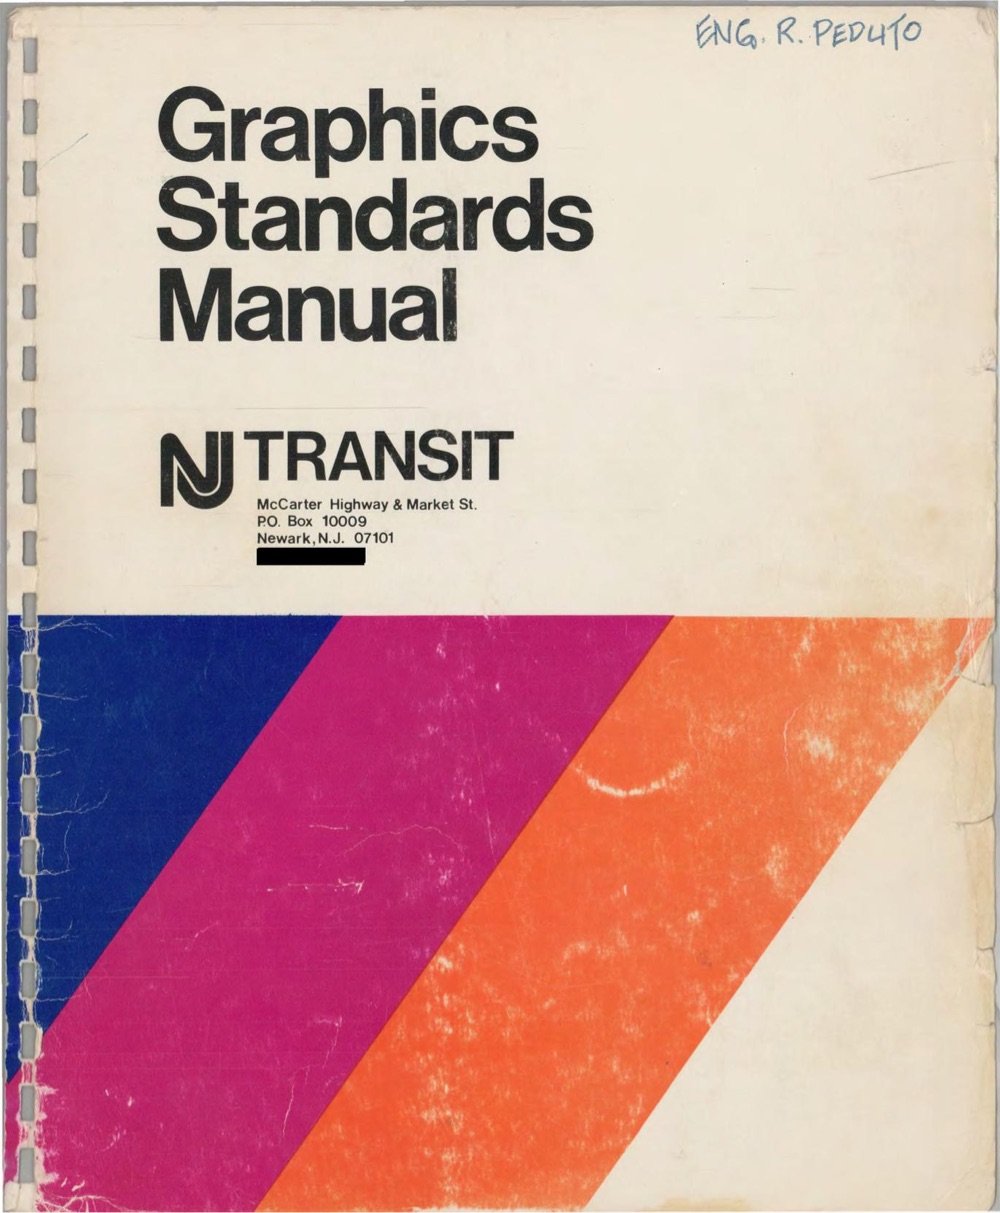 cover for the NJ Transit Graphics Standards Manual